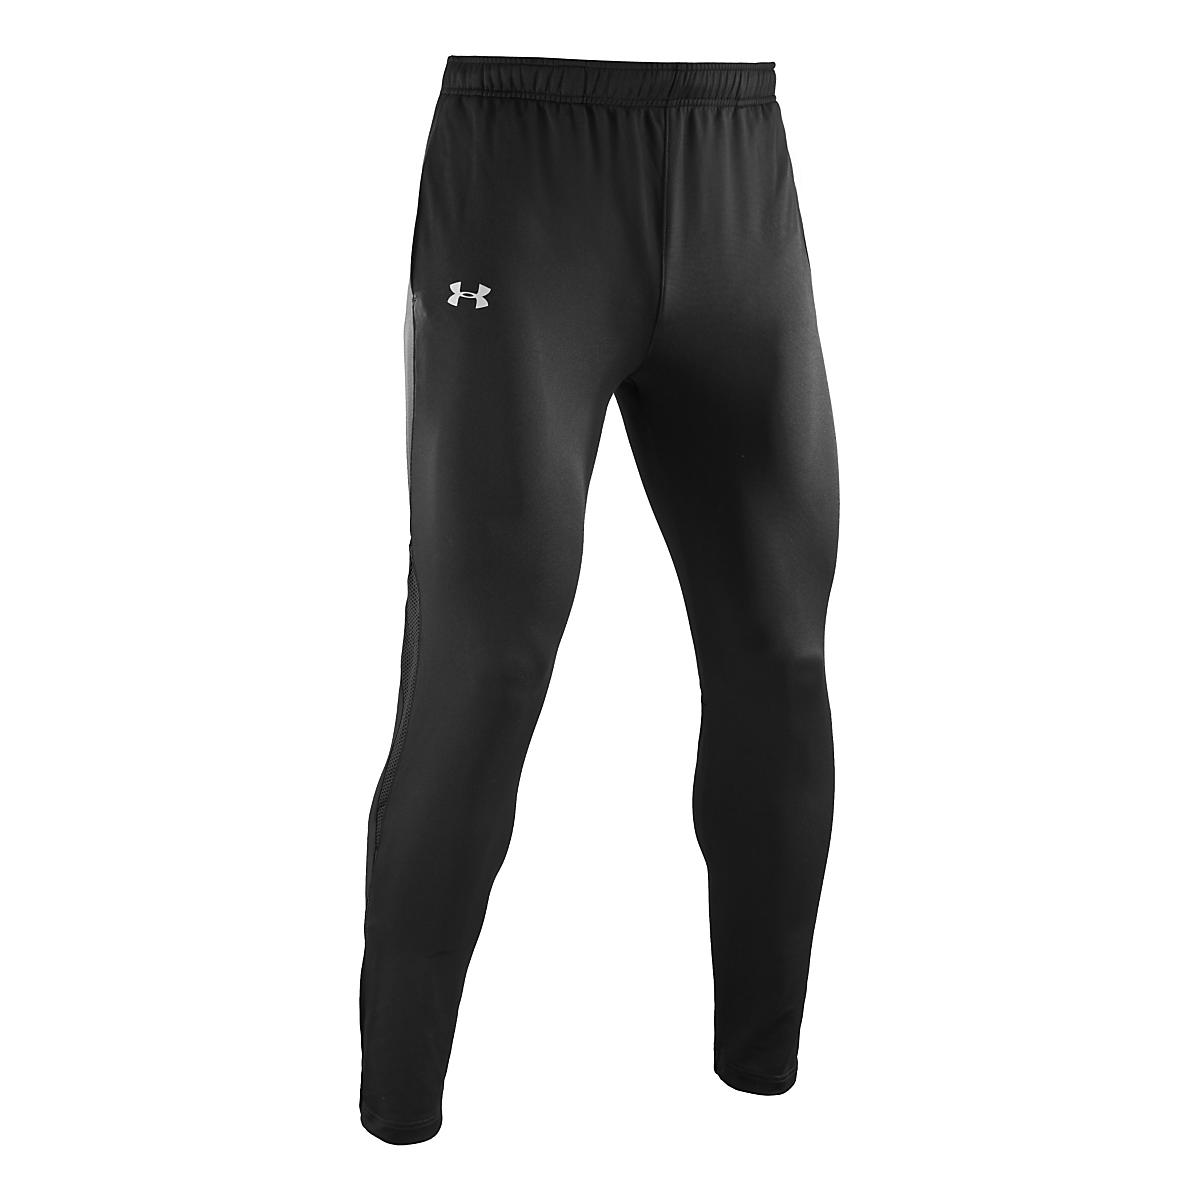 Mens Under Armour Draft ColdGear Cold weather Pants at Road Runner Sports